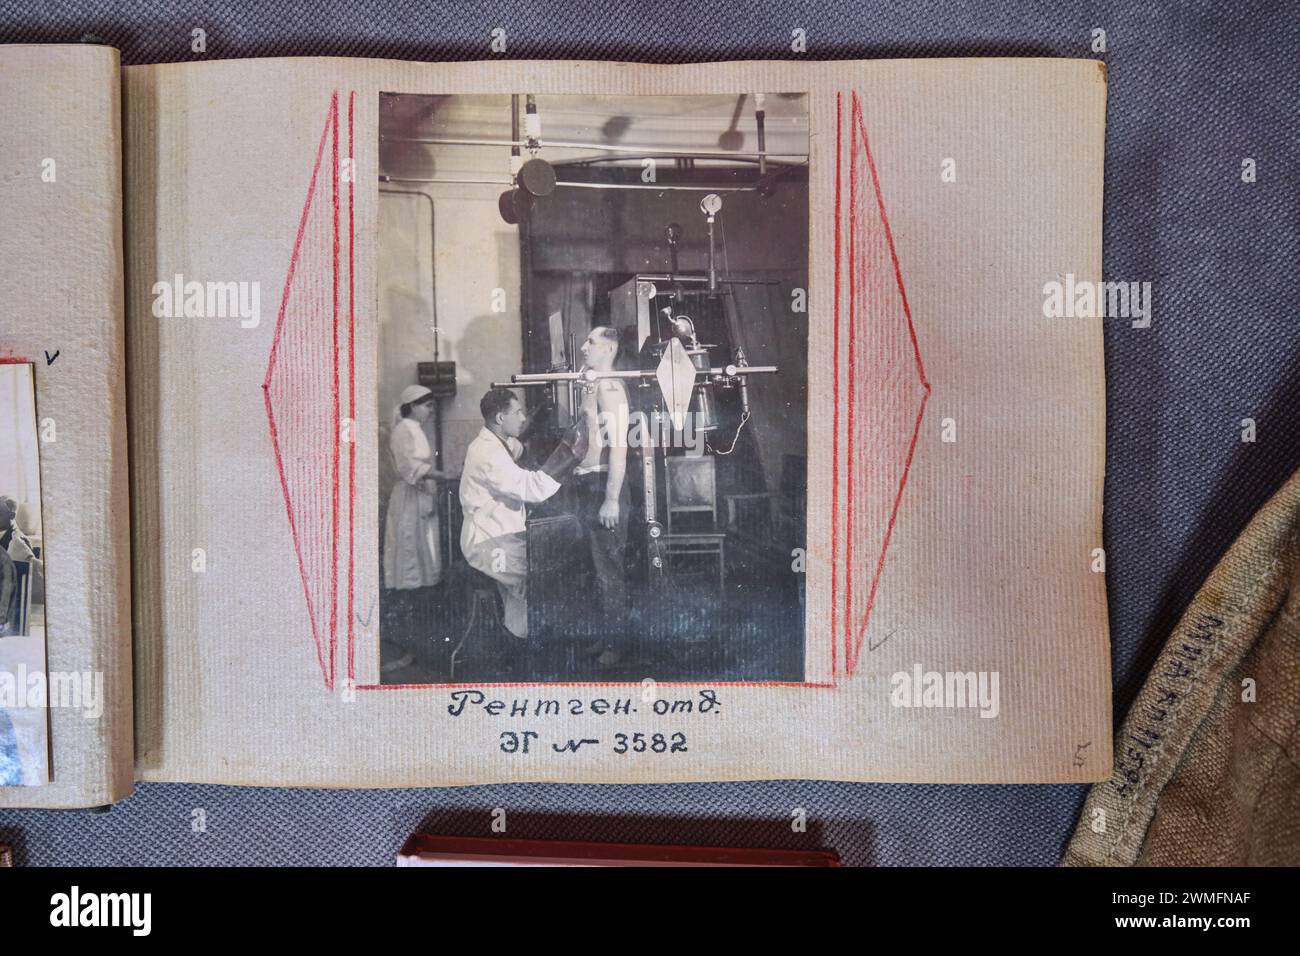 An old B&W photograph in an album, showing a sick patient getting an old film X-Ray. At the Almaty Museum of Local History in Almaty, Kazakhstan. Stock Photo